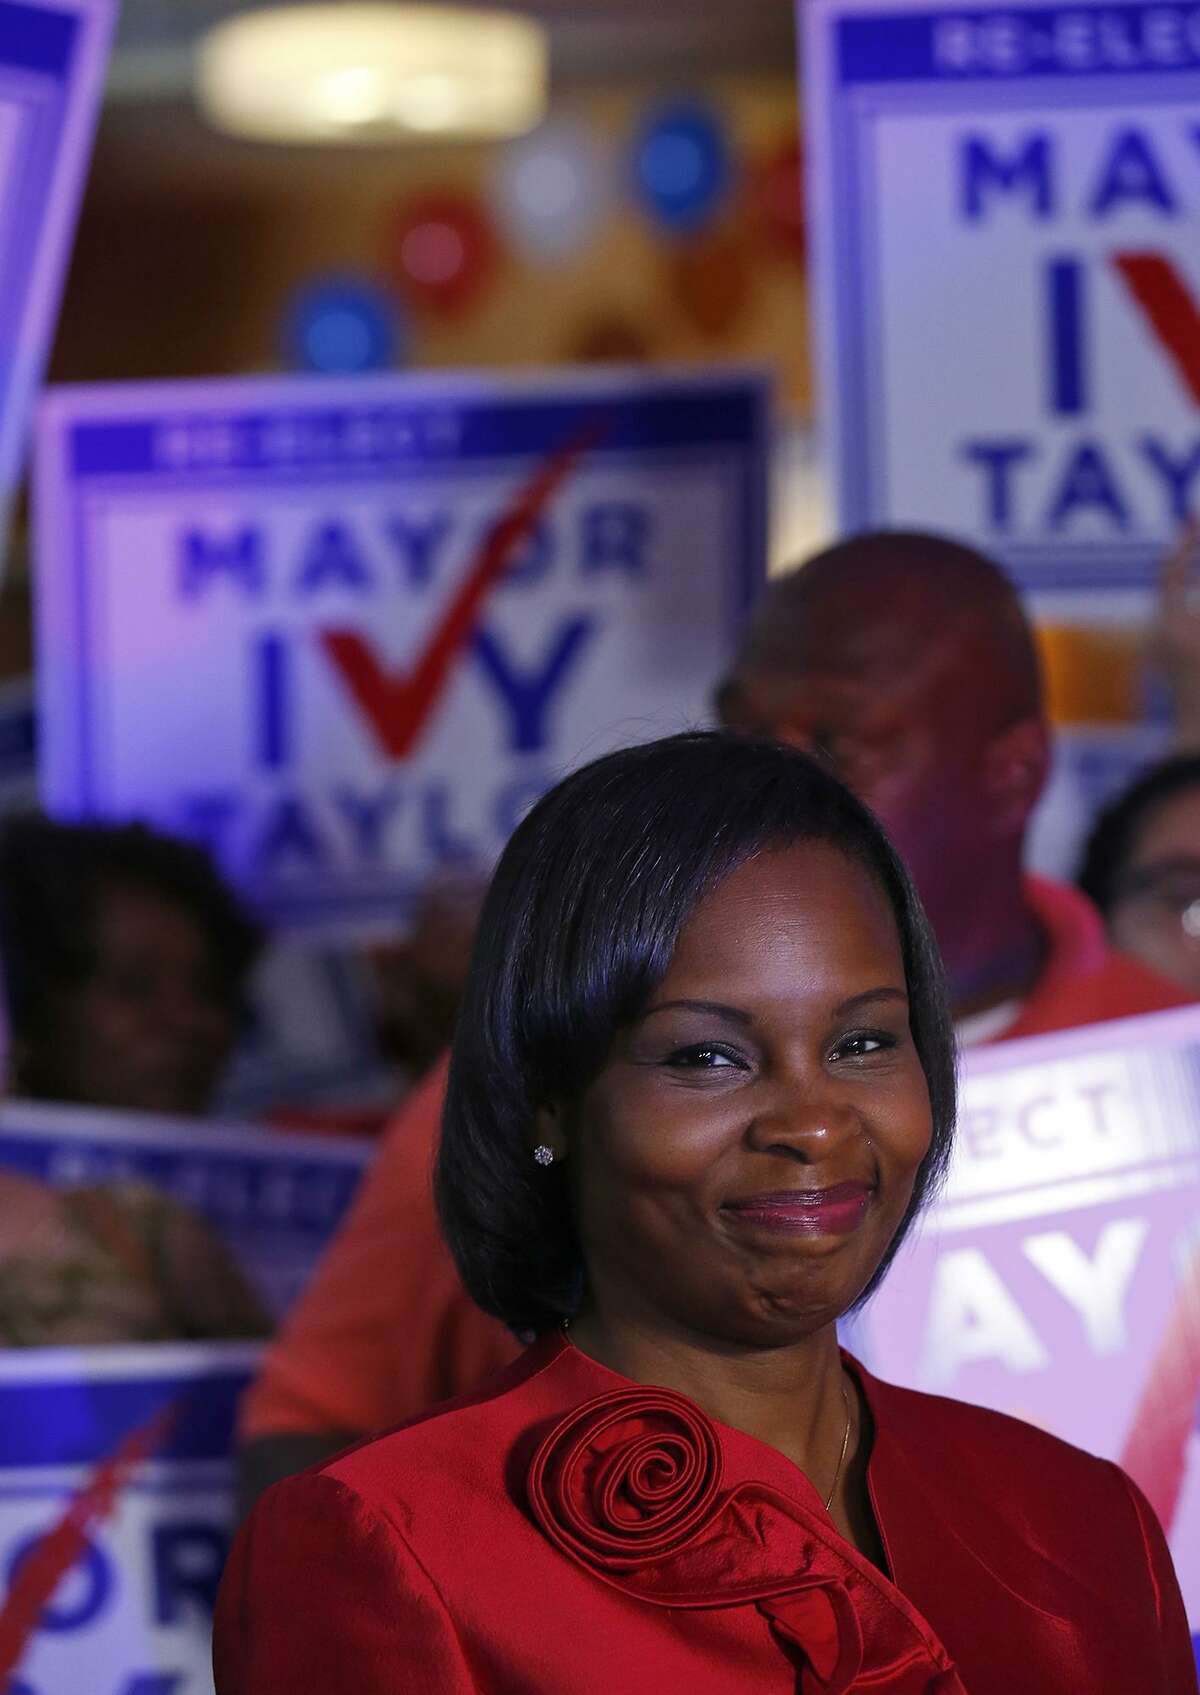 Mayor Ivy Taylor pauses before being interviewed at a watch party May 6, 2017, after she came in first in the election but she faces a runoff against Councilman Ron Nirenberg.